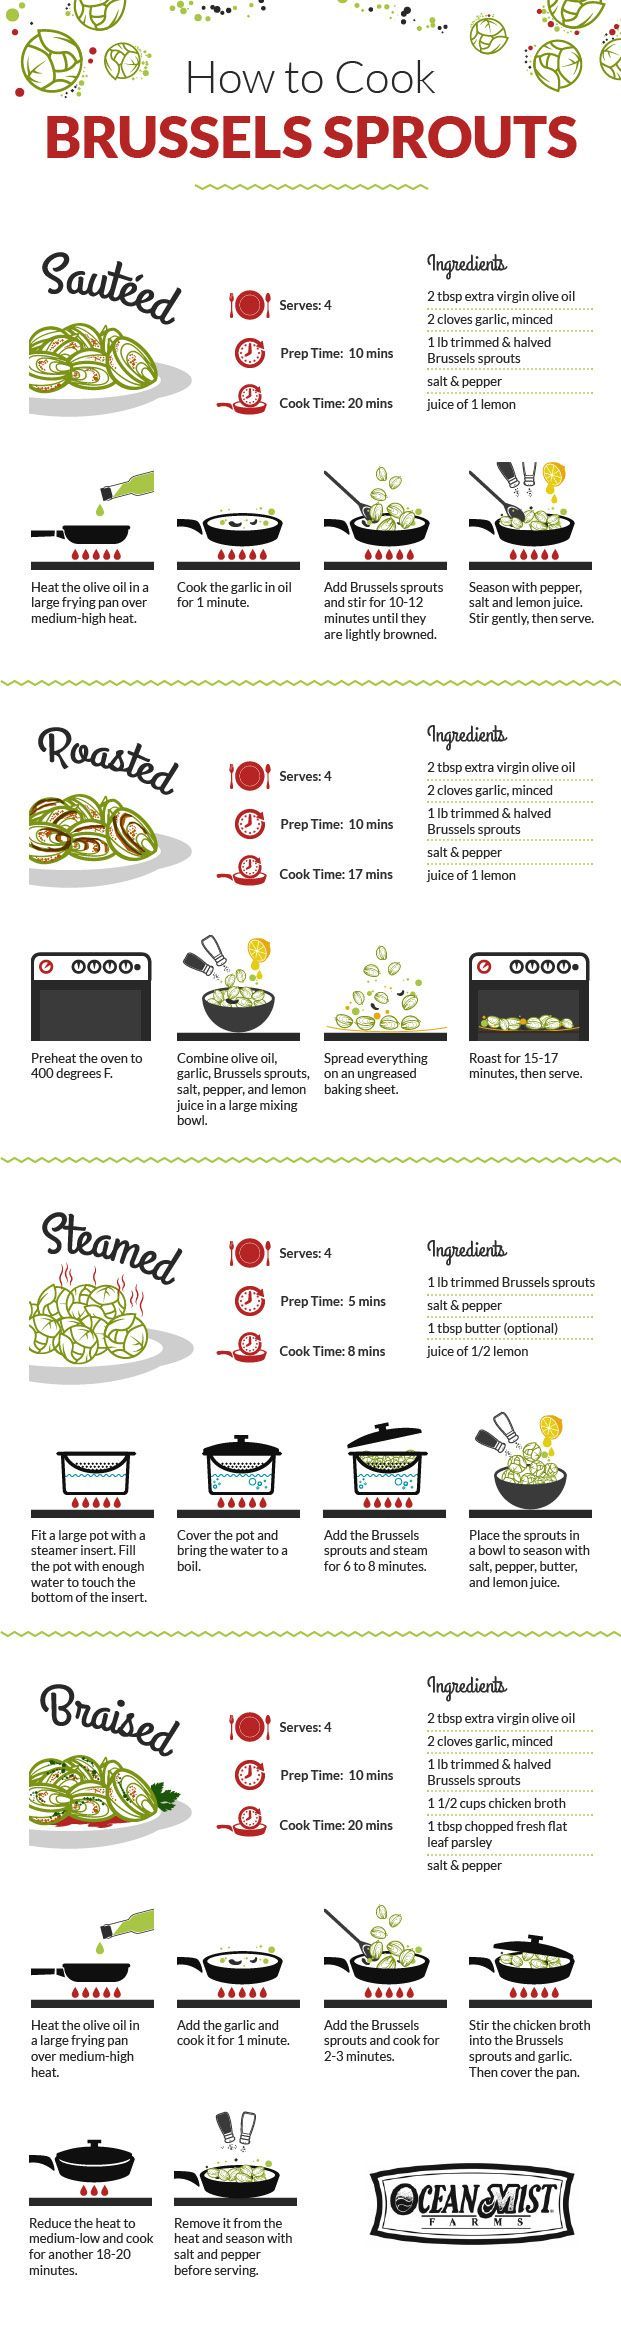 A great infographic on “How to Cook Brussels Sprouts”